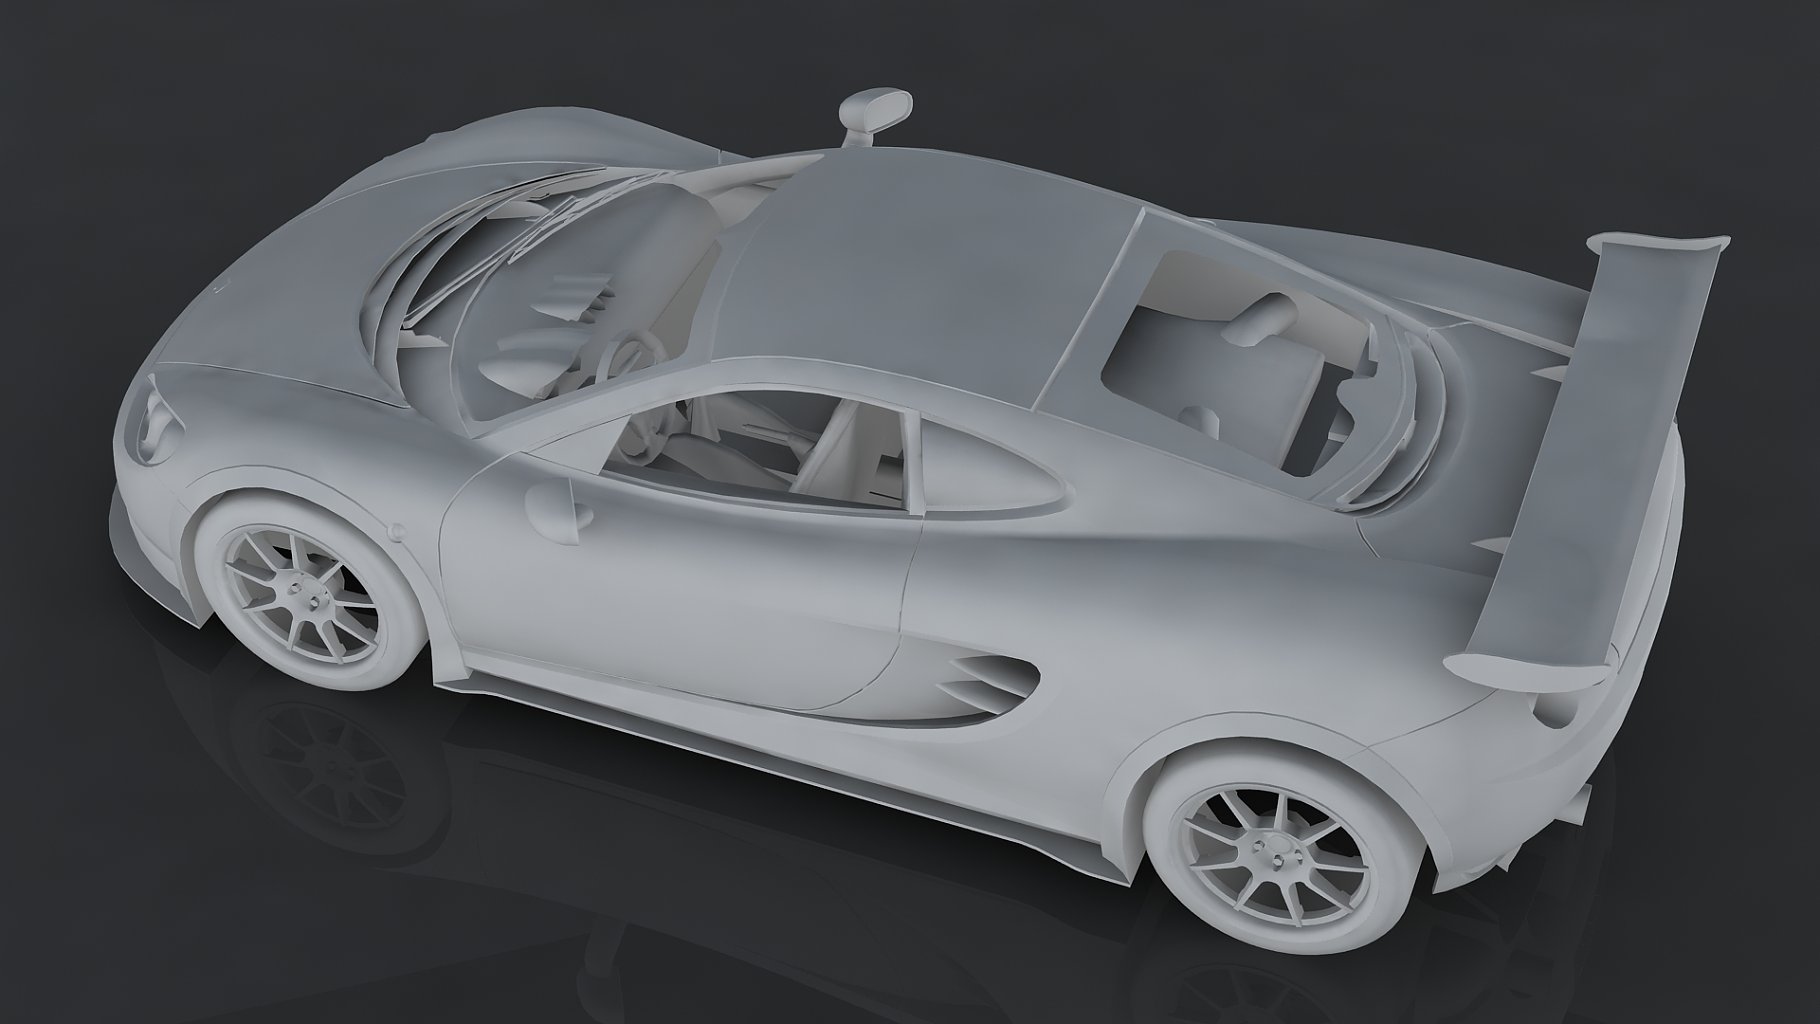 Graphic mockup of ascari kz1r low poly 3d model from above.